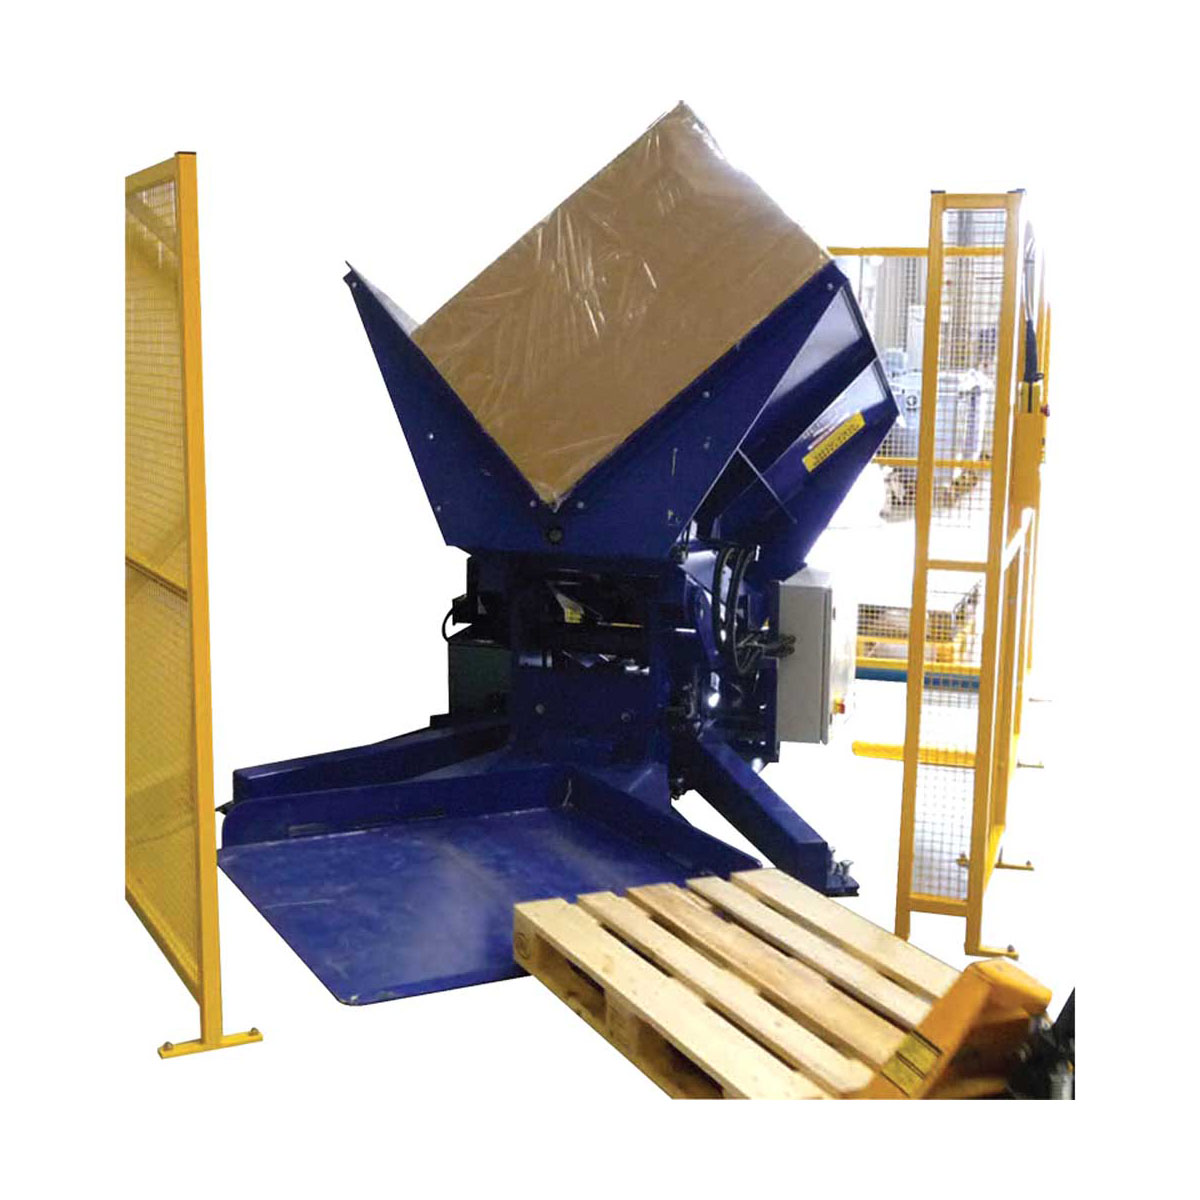 Pallet Changer In use with goods